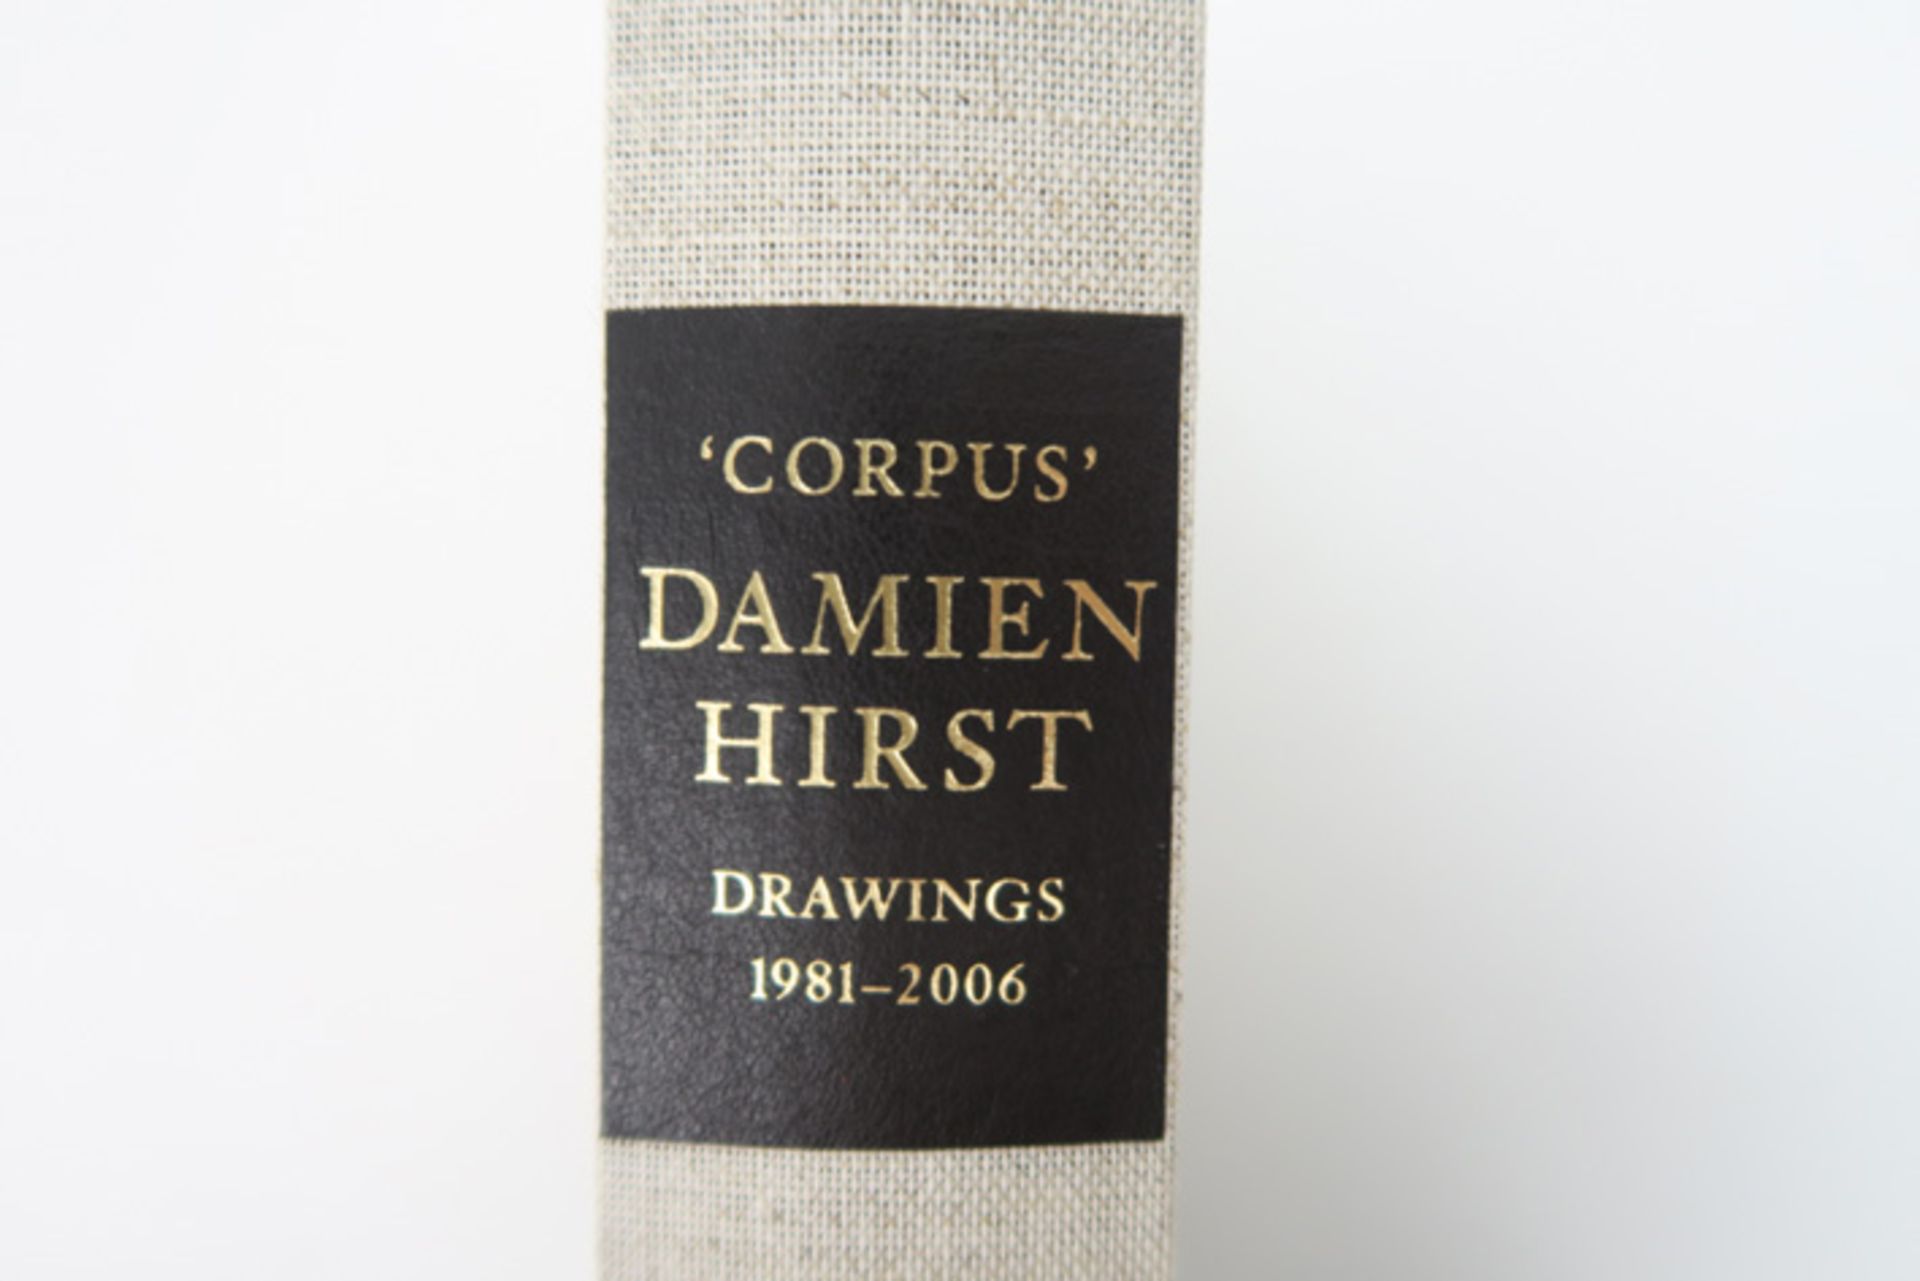 Damien Hirst signed copy of the book "Corpus - Drawings 1981 - 2006" HIRST DAMIEN (° 1965) door - Image 2 of 4